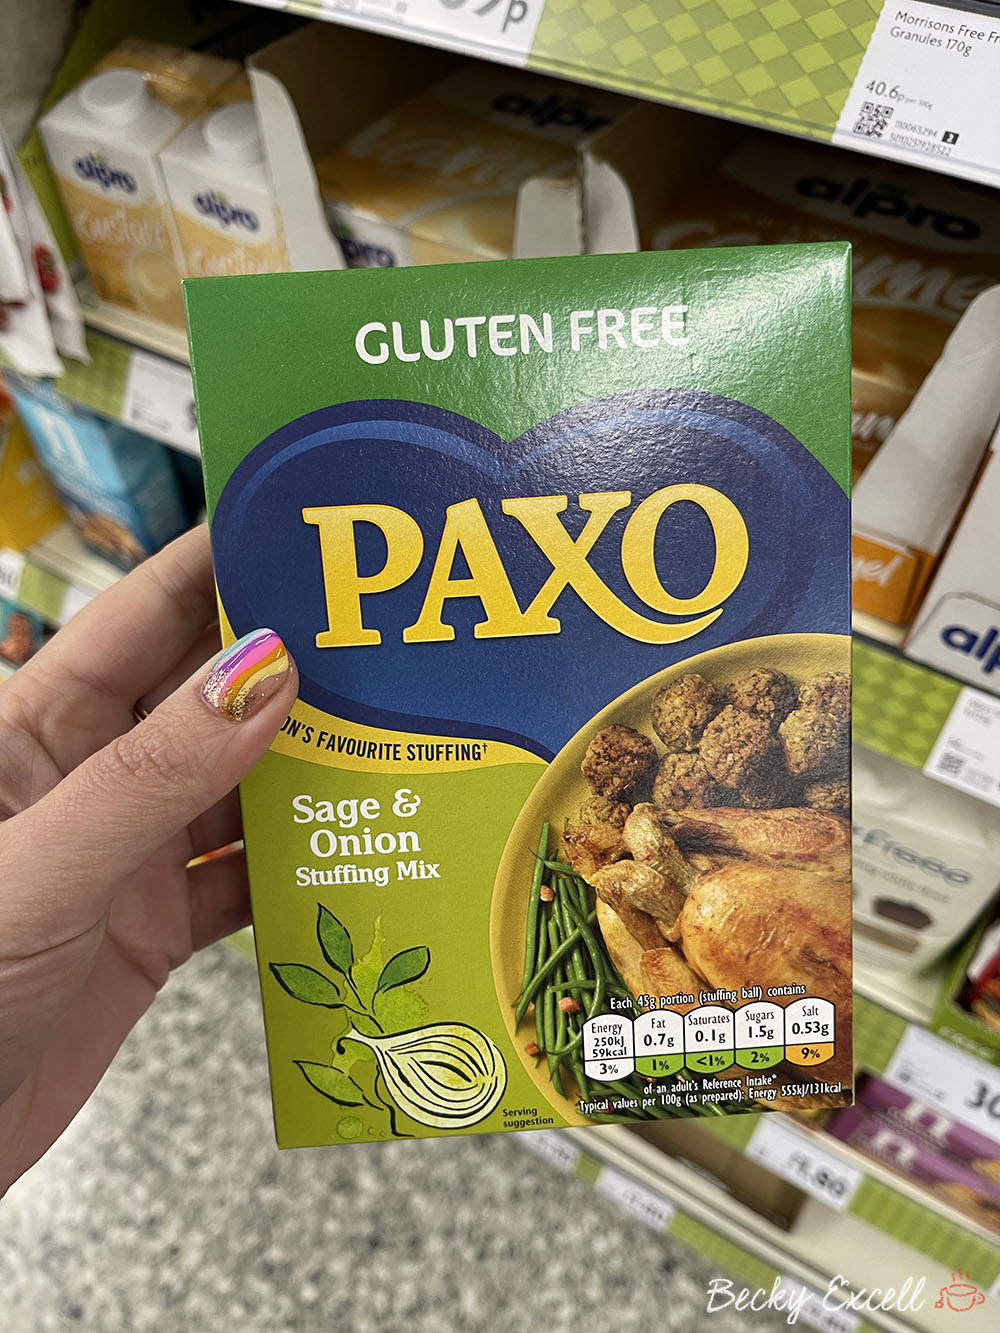 Morrisons gluten-free Christmas products - paxo gluten-free stuffing